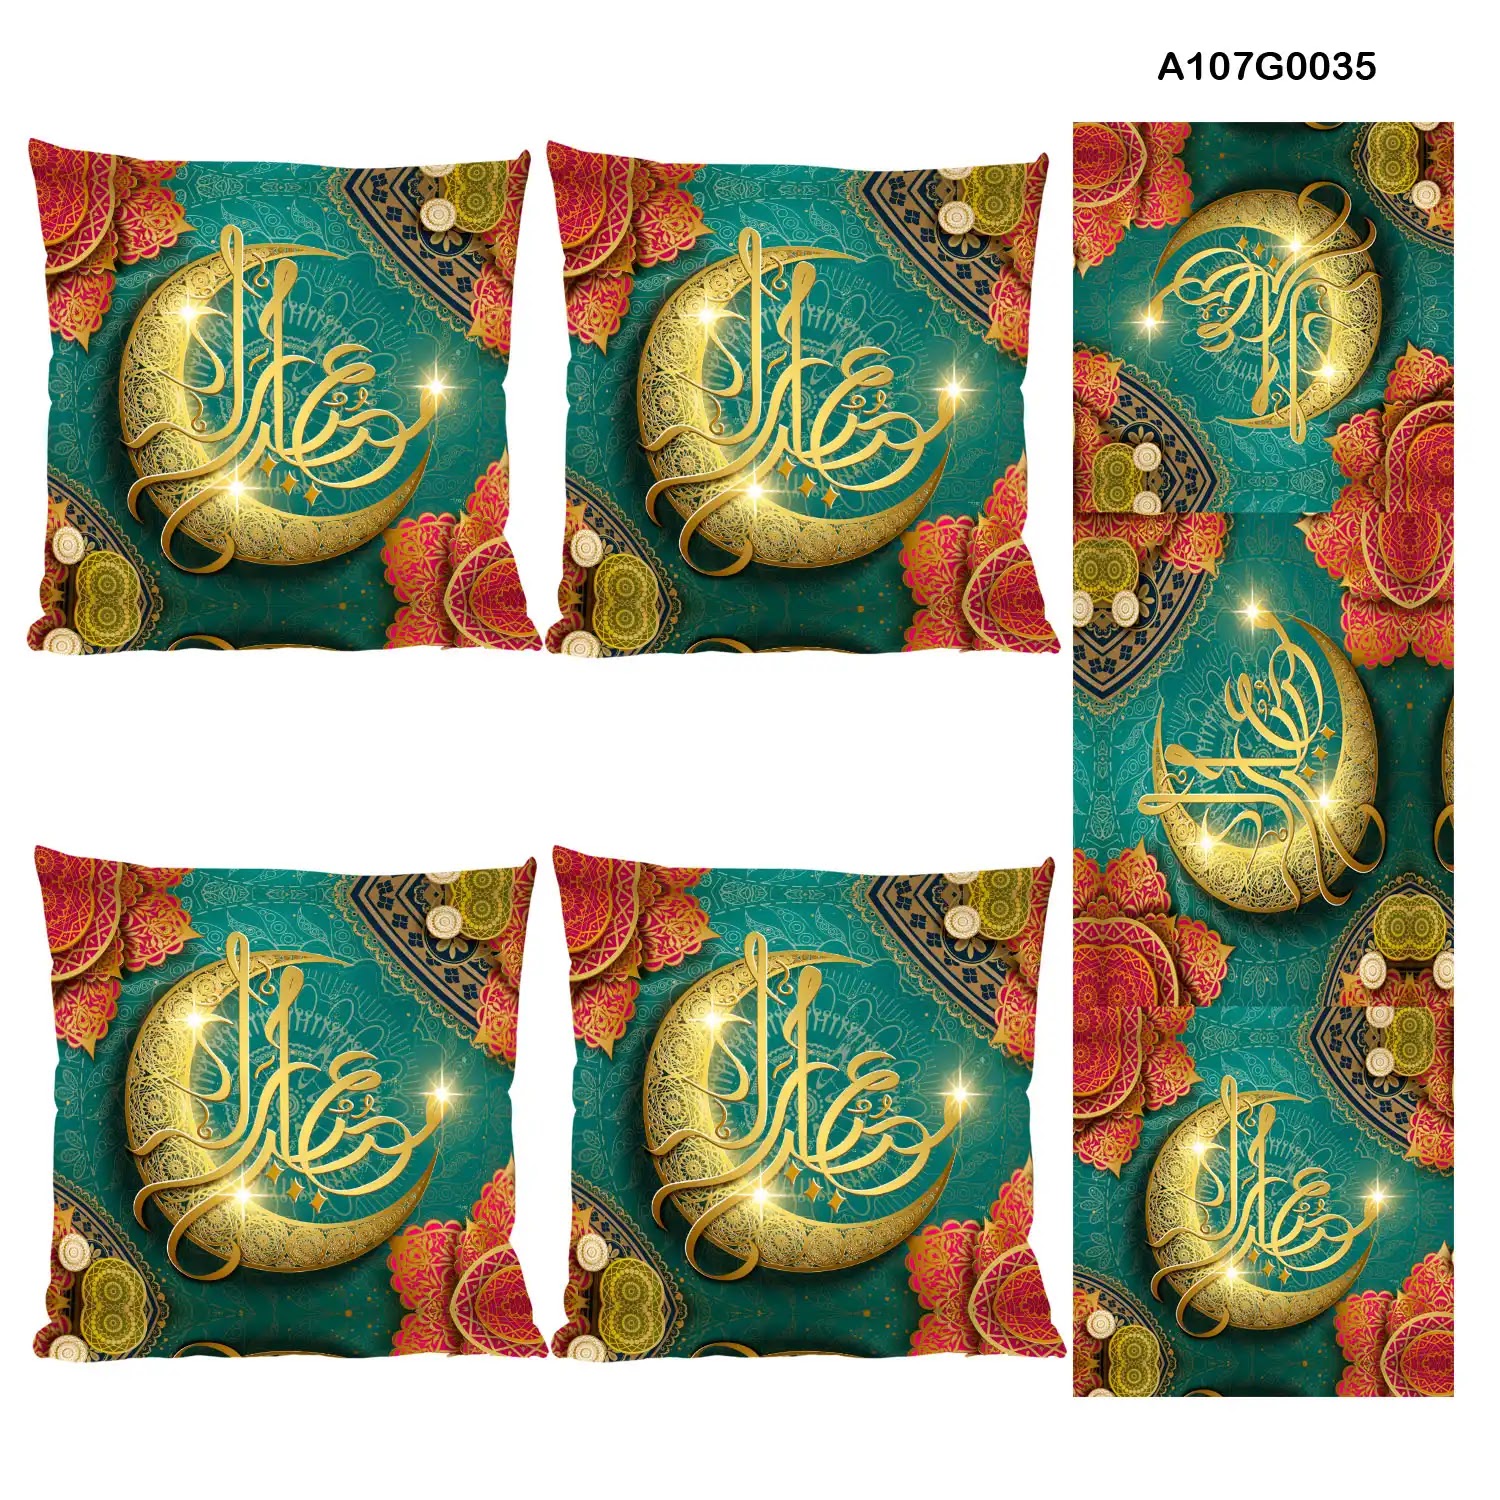 Orange and green Pillow cover set & table runner with gold Ramadan Crescent drawing